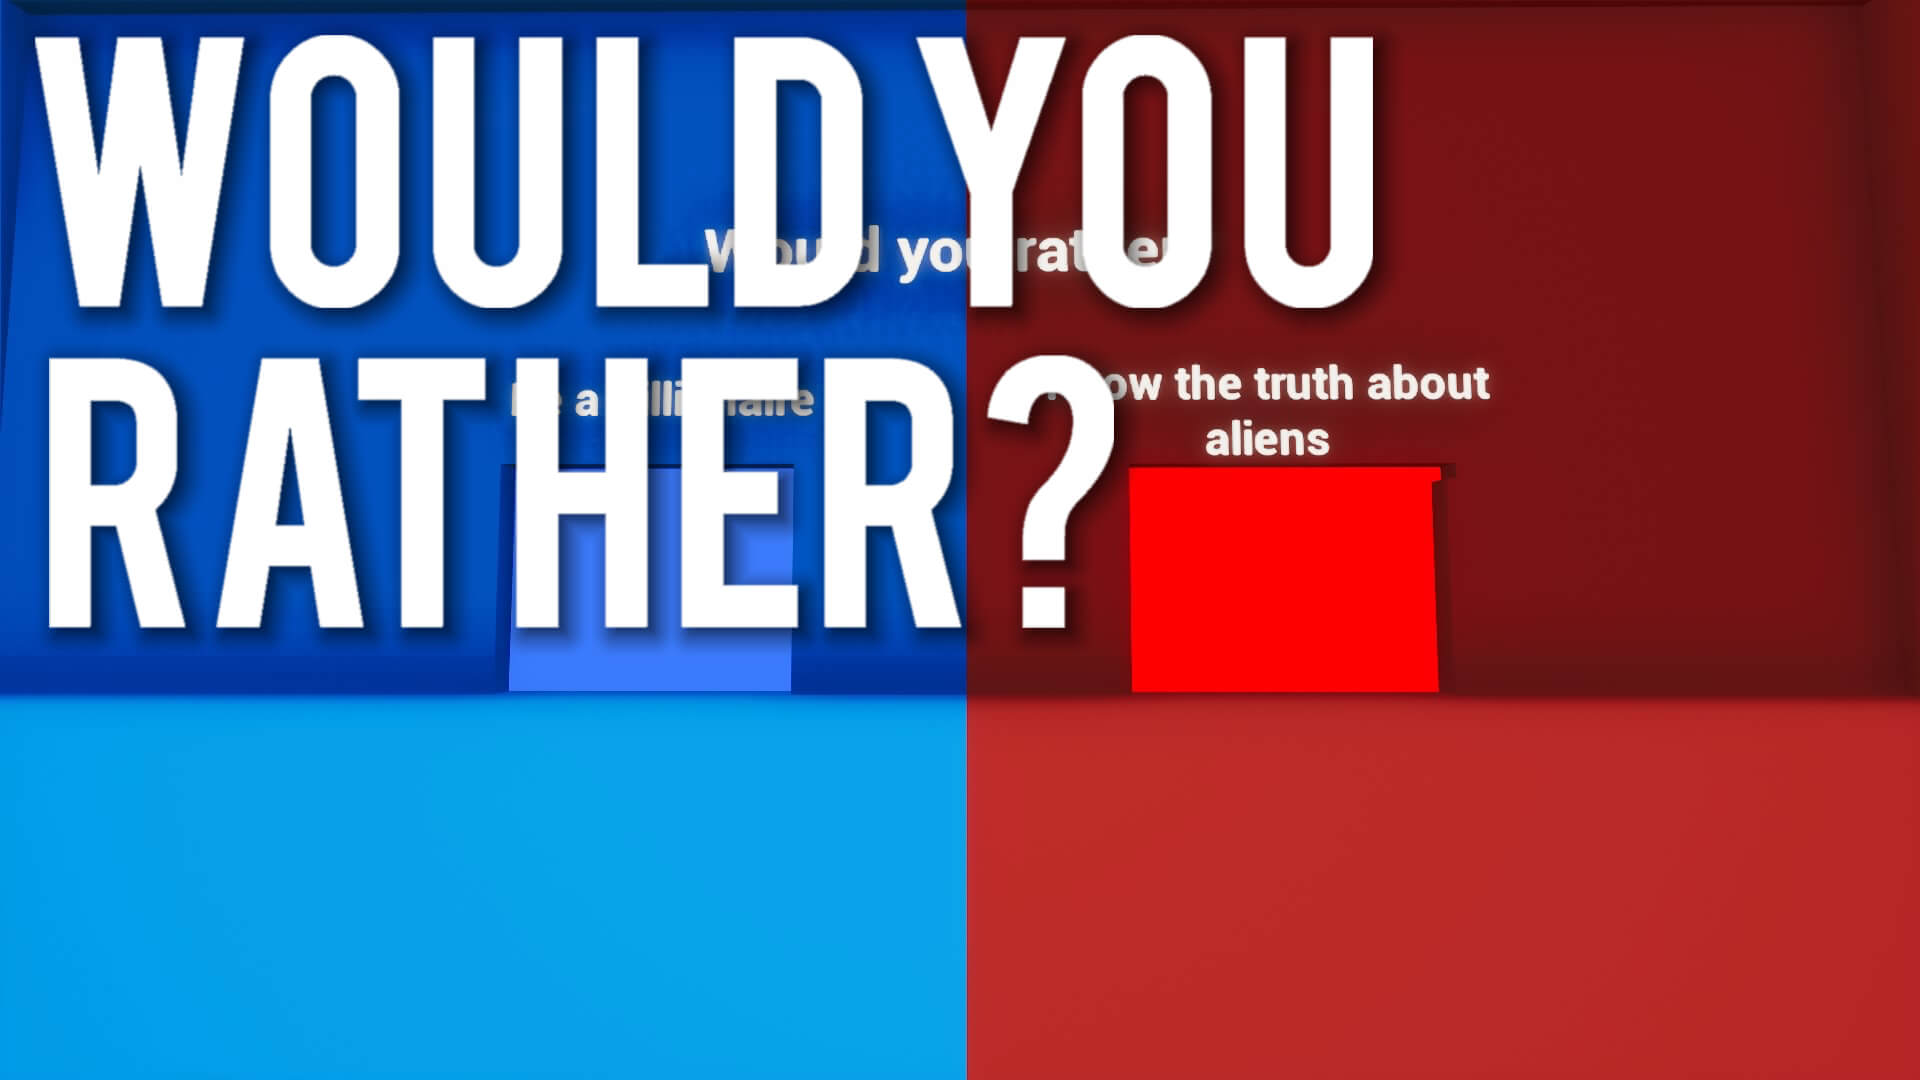 WOULD YOU RATHER?